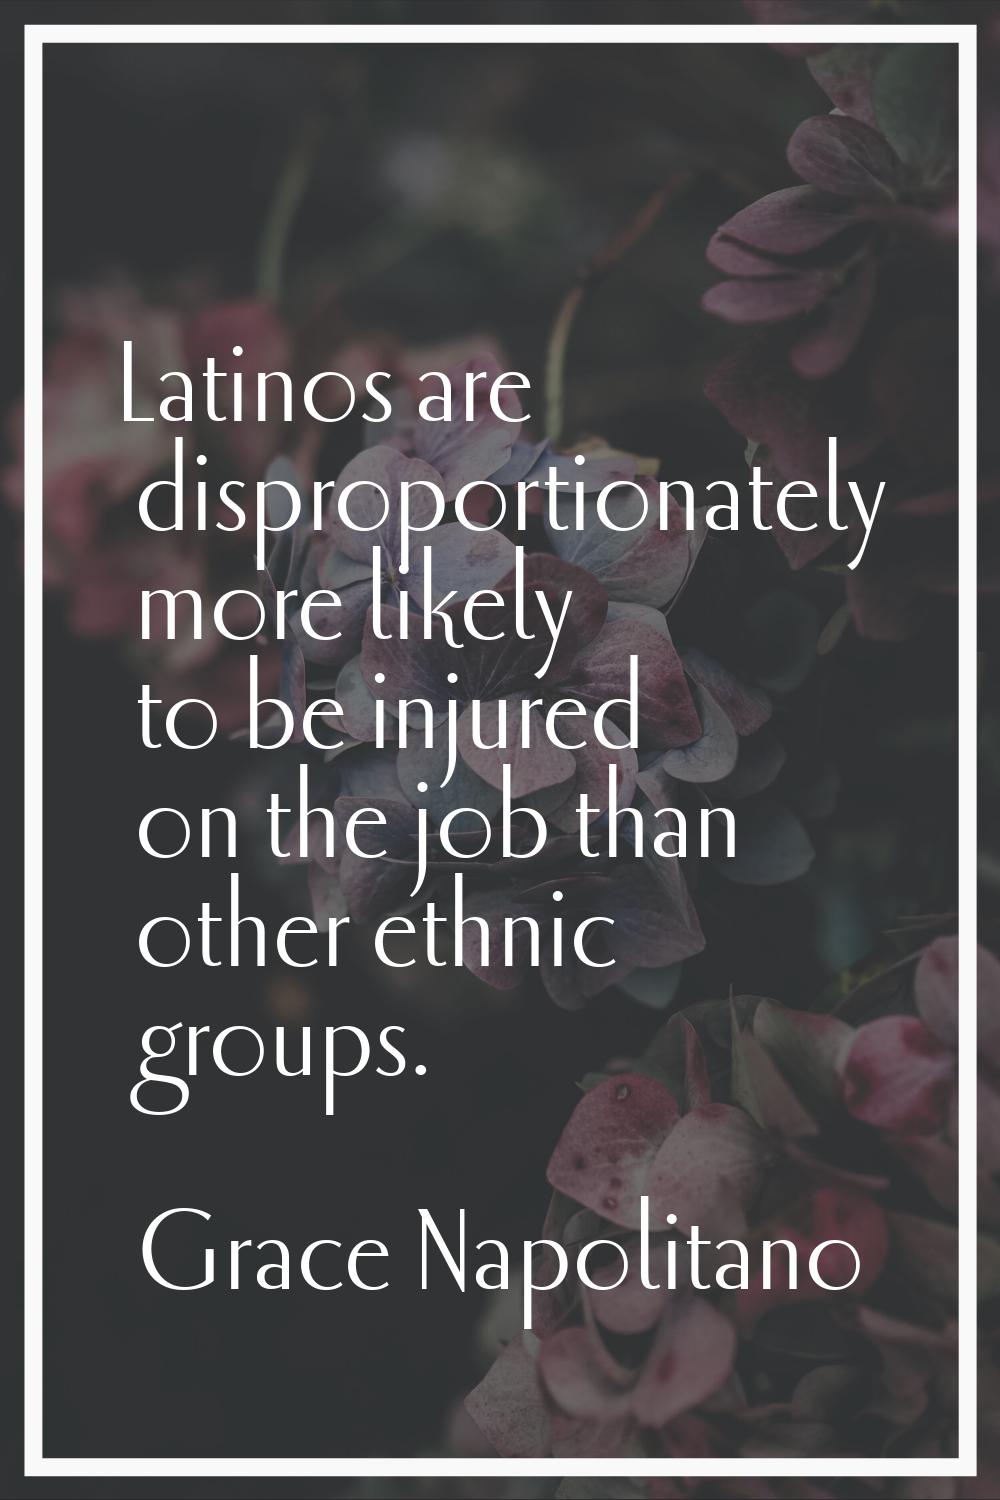 Latinos are disproportionately more likely to be injured on the job than other ethnic groups.